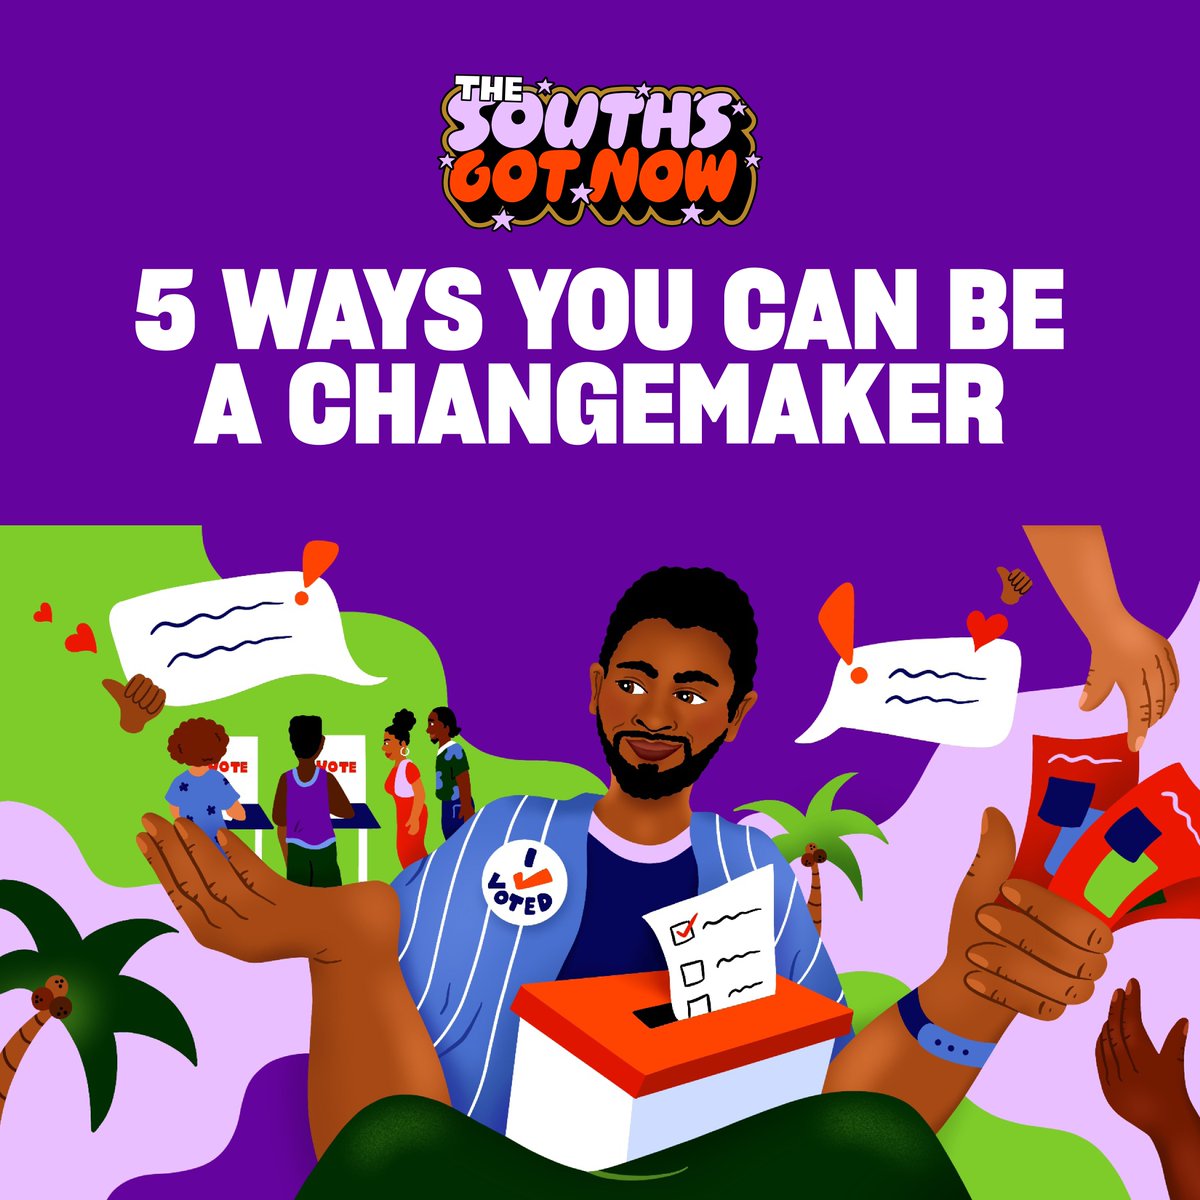 The 2024 presidential election is just months away. Why not help by volunteering as a changemaker in this vital election? Here are five ways you can contribute: bit.ly/3KcAjJ7 #TheSouthsGotNow